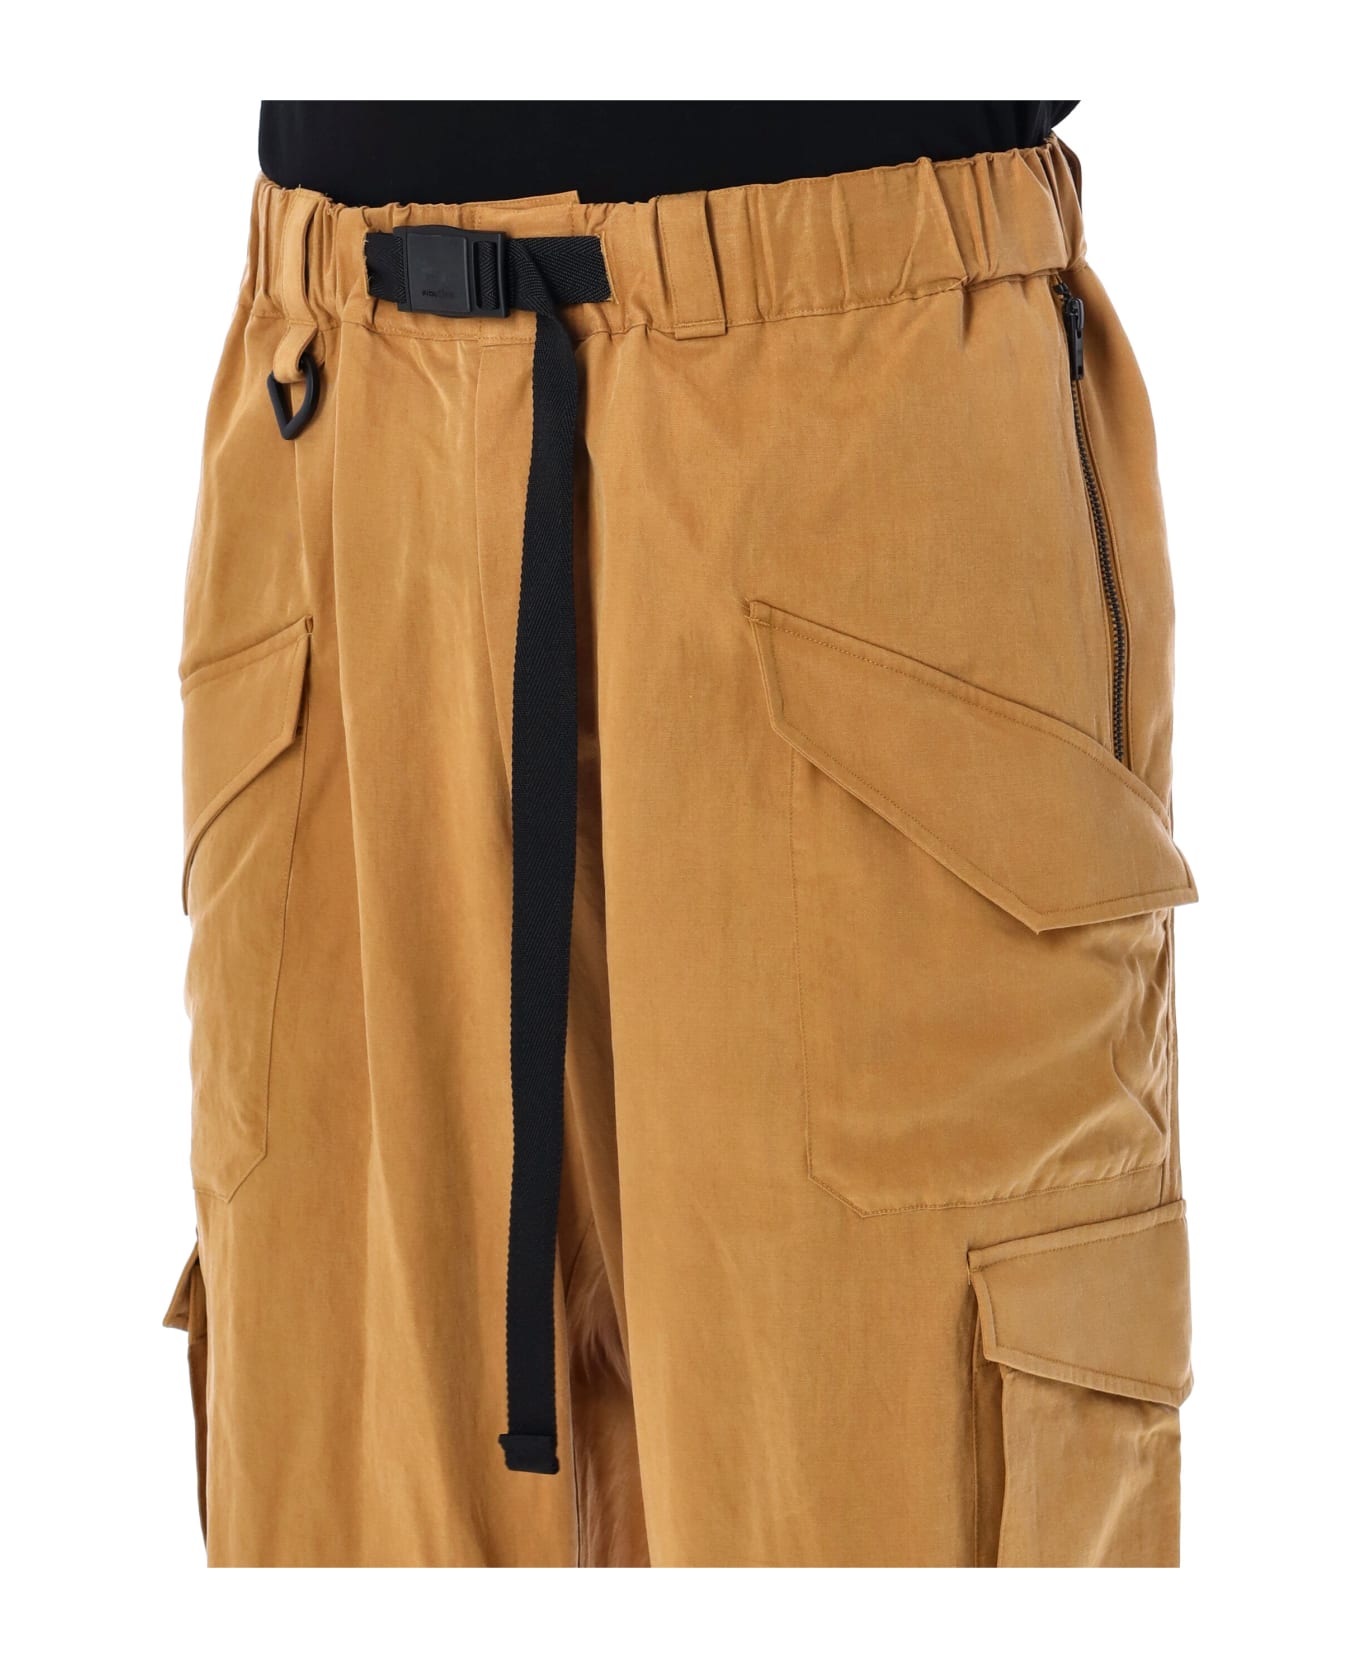 Y-3 Belted Cargo Pants - TOBACCO